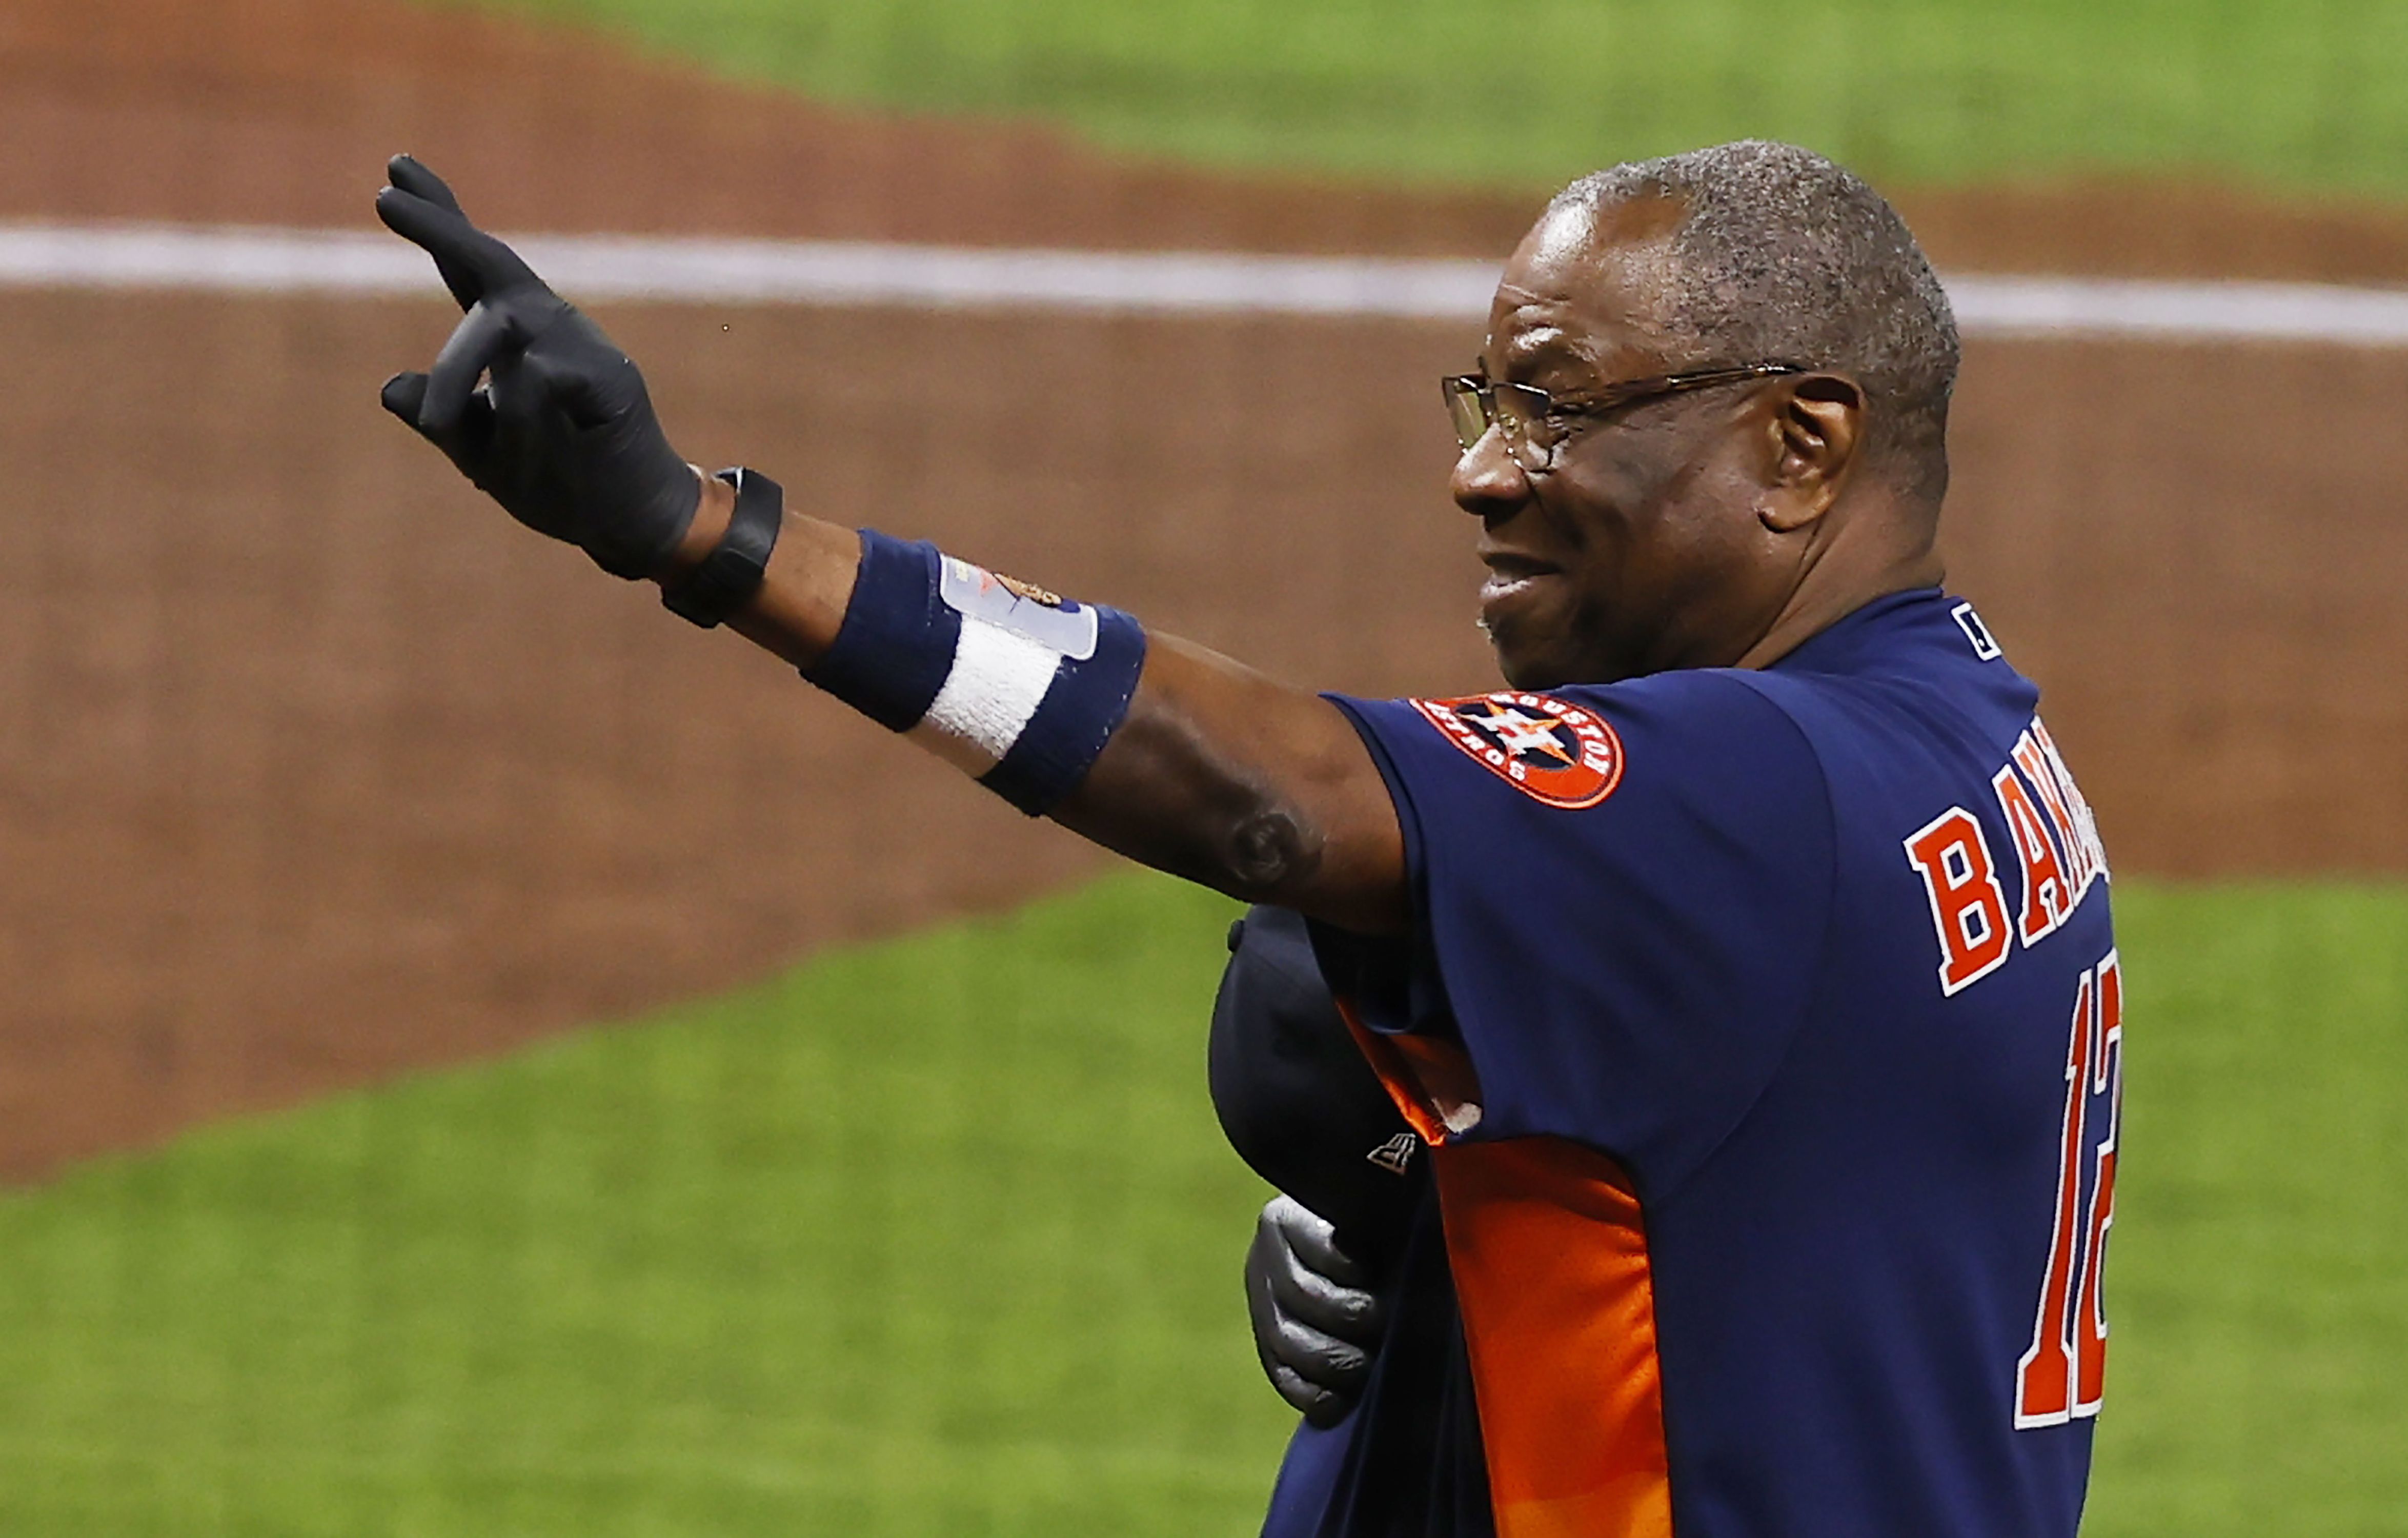 Astros' Dusty Baker lacking World Series title on managerial resume -  Chicago Sun-Times